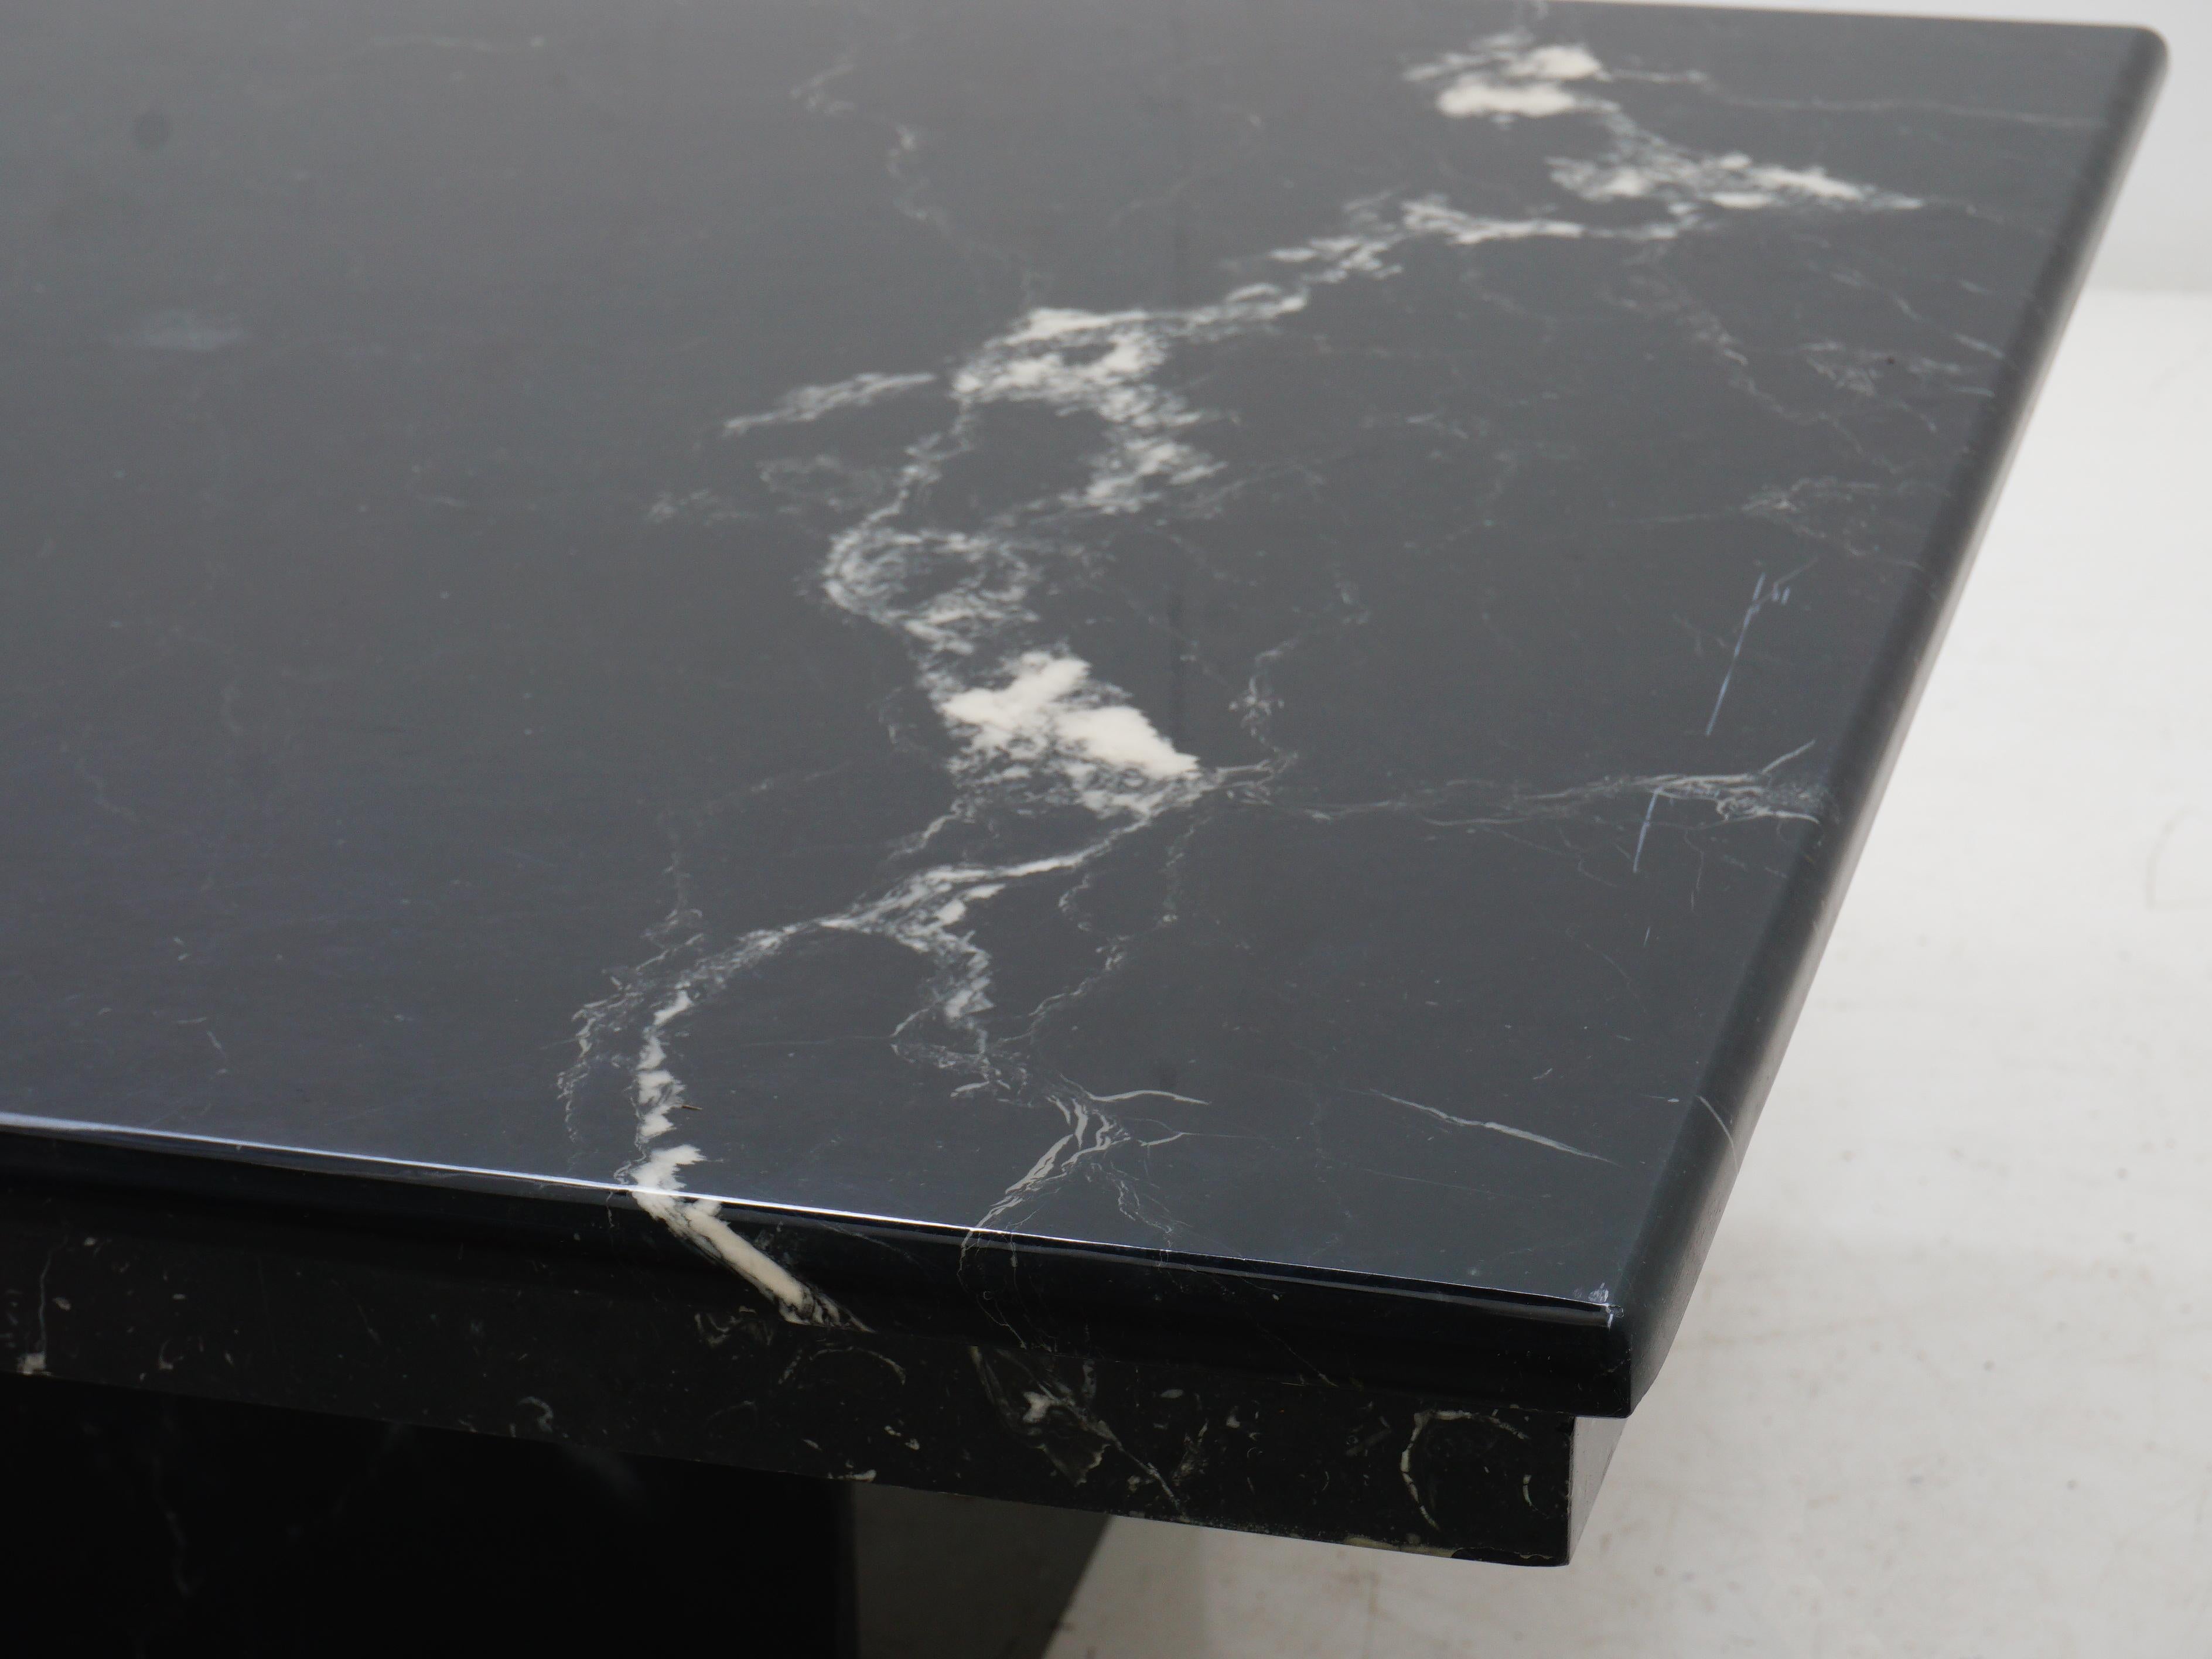 Uplift your living room with this Italian black marble coffee table – where drama meets your morning espresso. This sleek slab of marble doesn't just hold your mugs; it adds a touch of la dolce vita to your living space. Buon giorno to the chicest